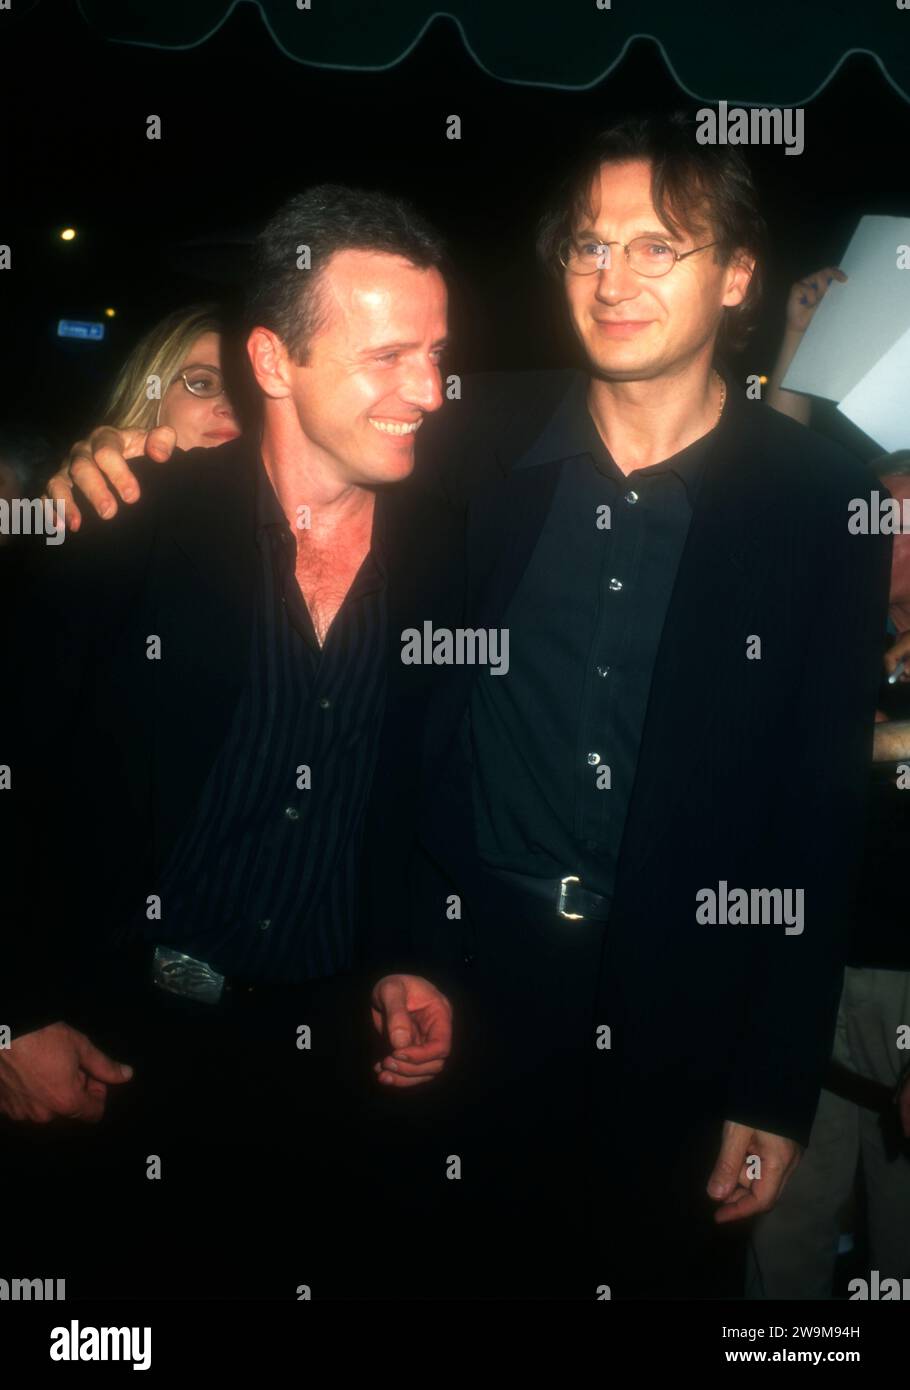 Los Angeles, California, USA 8th October 1996 Actor Aidan Quinn and Actor Liam Neeson attend Warner Bros. ÔMichael CollinsÕ Party at ChasenÕs Restaurant on October 8, 1996 in Los Angeles, California, USA. Photo by Barry King/Alamy Stock Photo Stock Photo